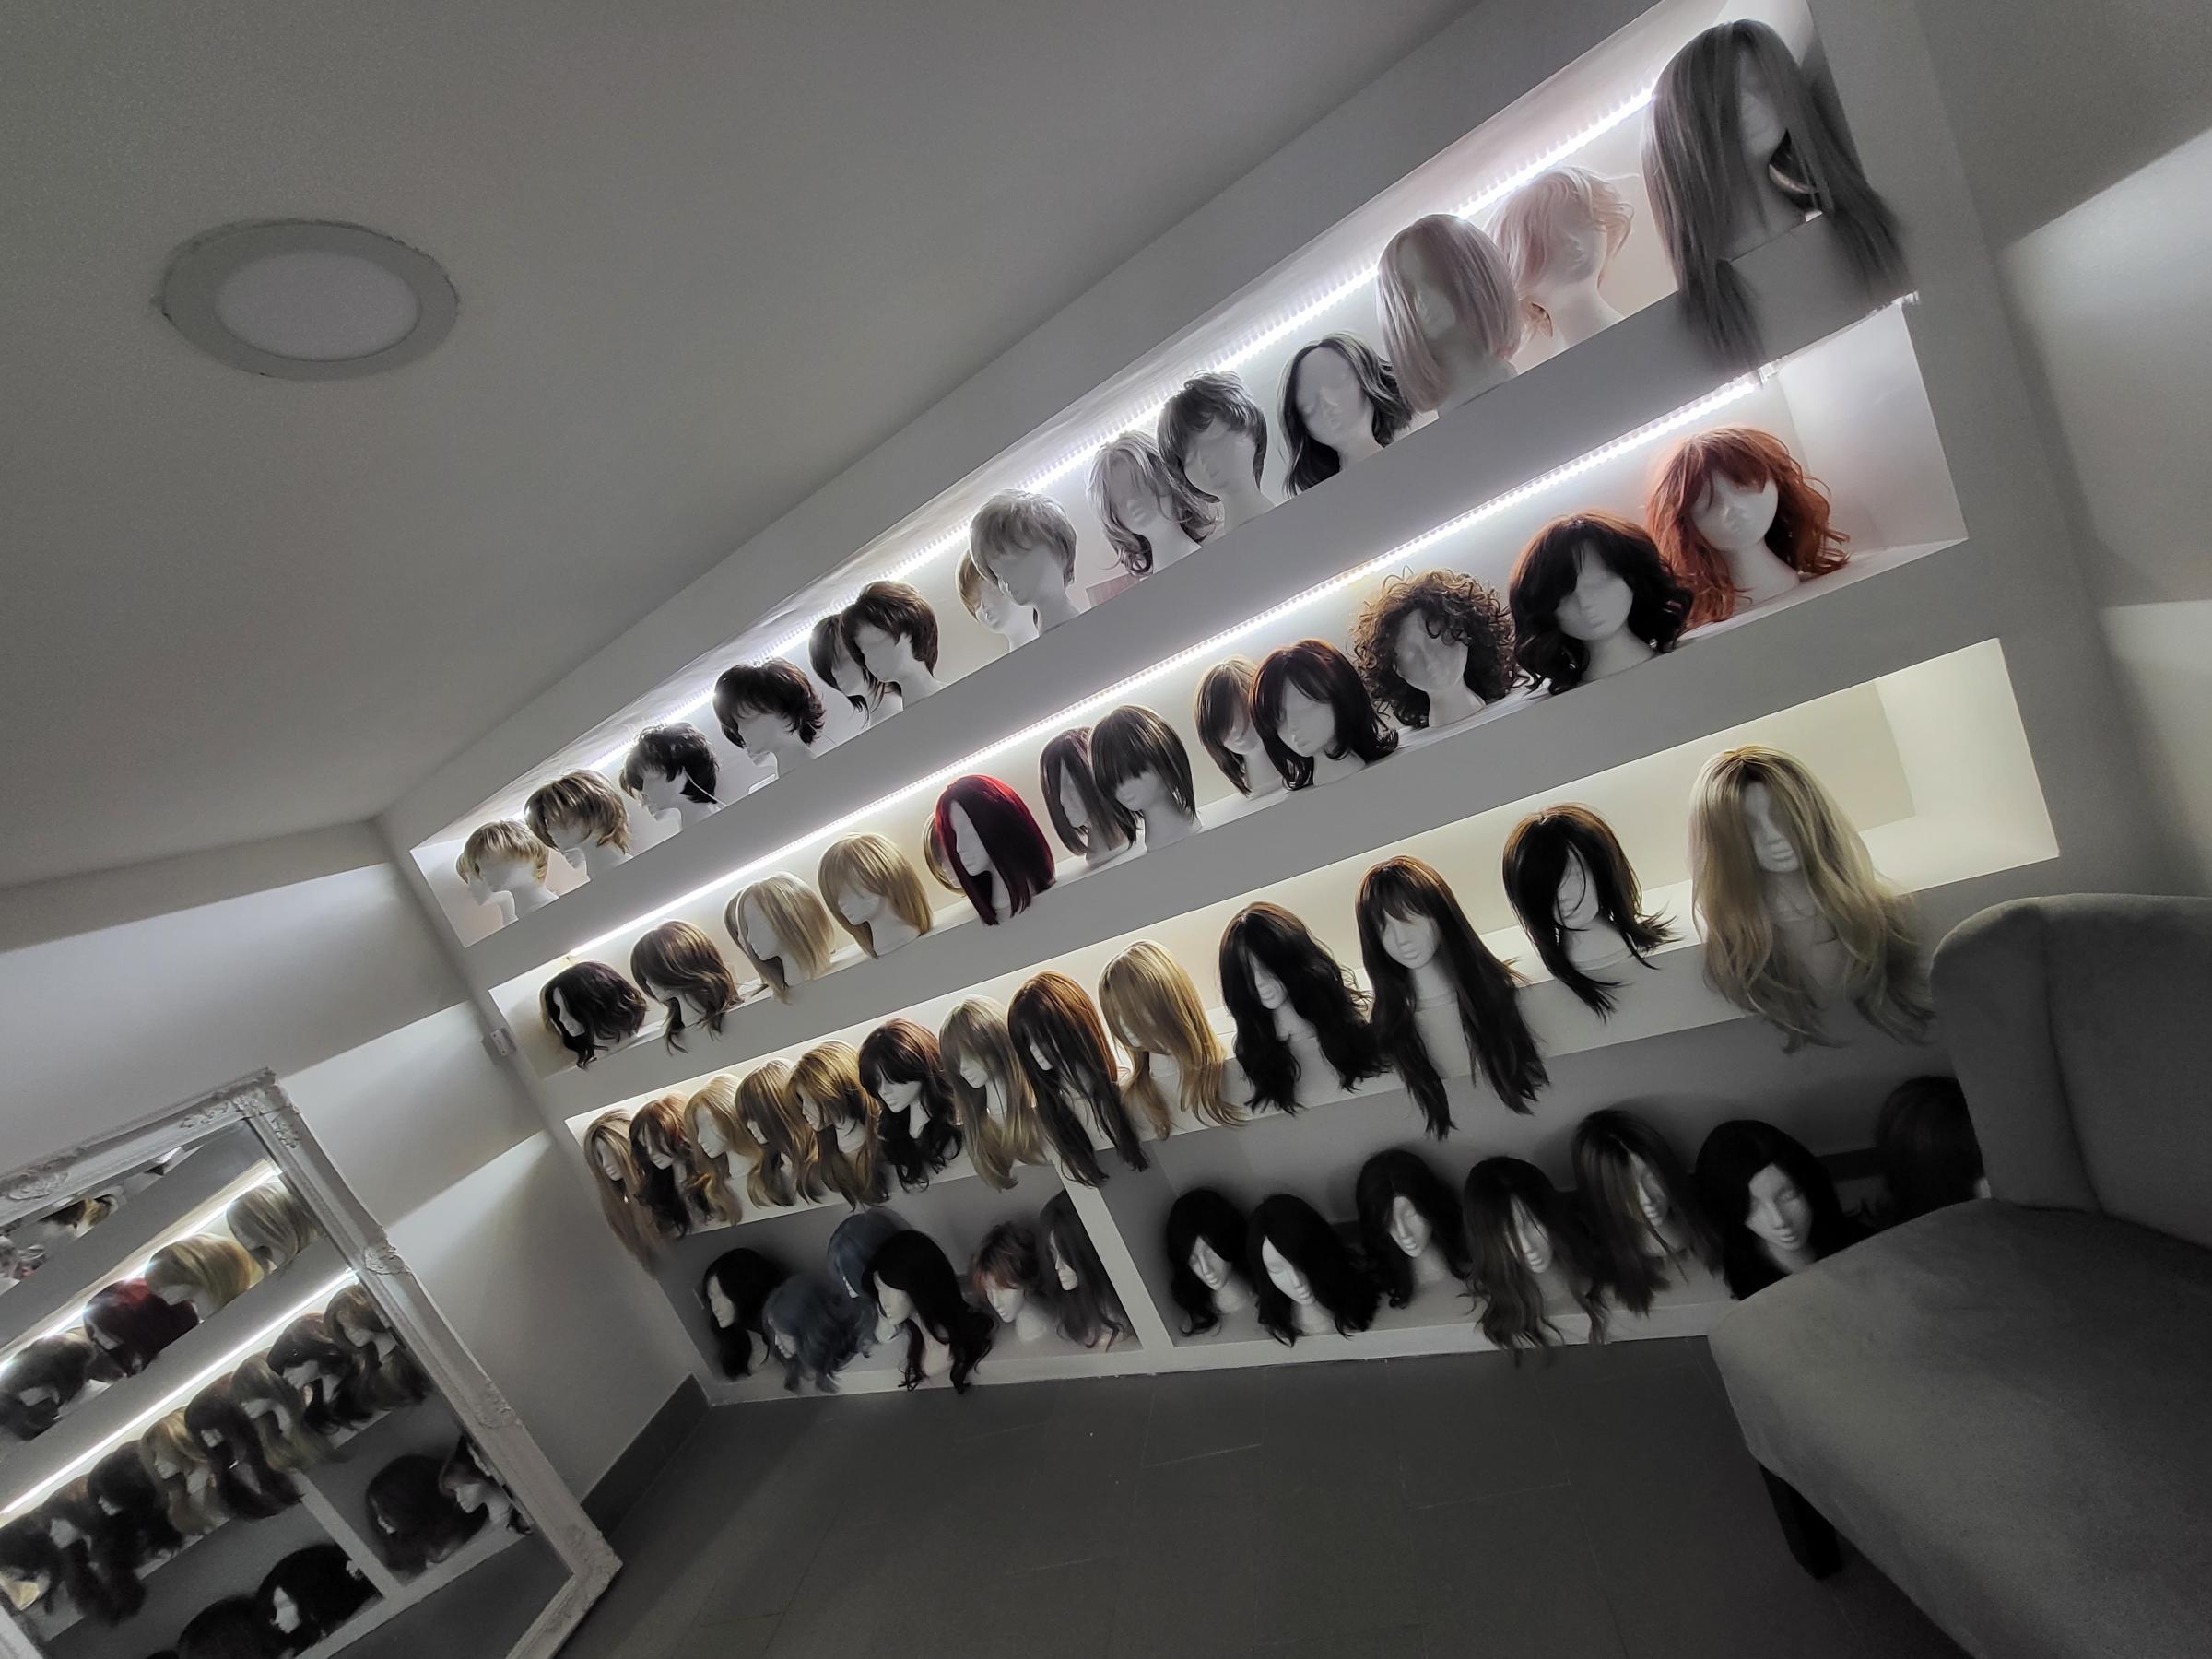 The Secret Halo has a wide selection of wigs on offer